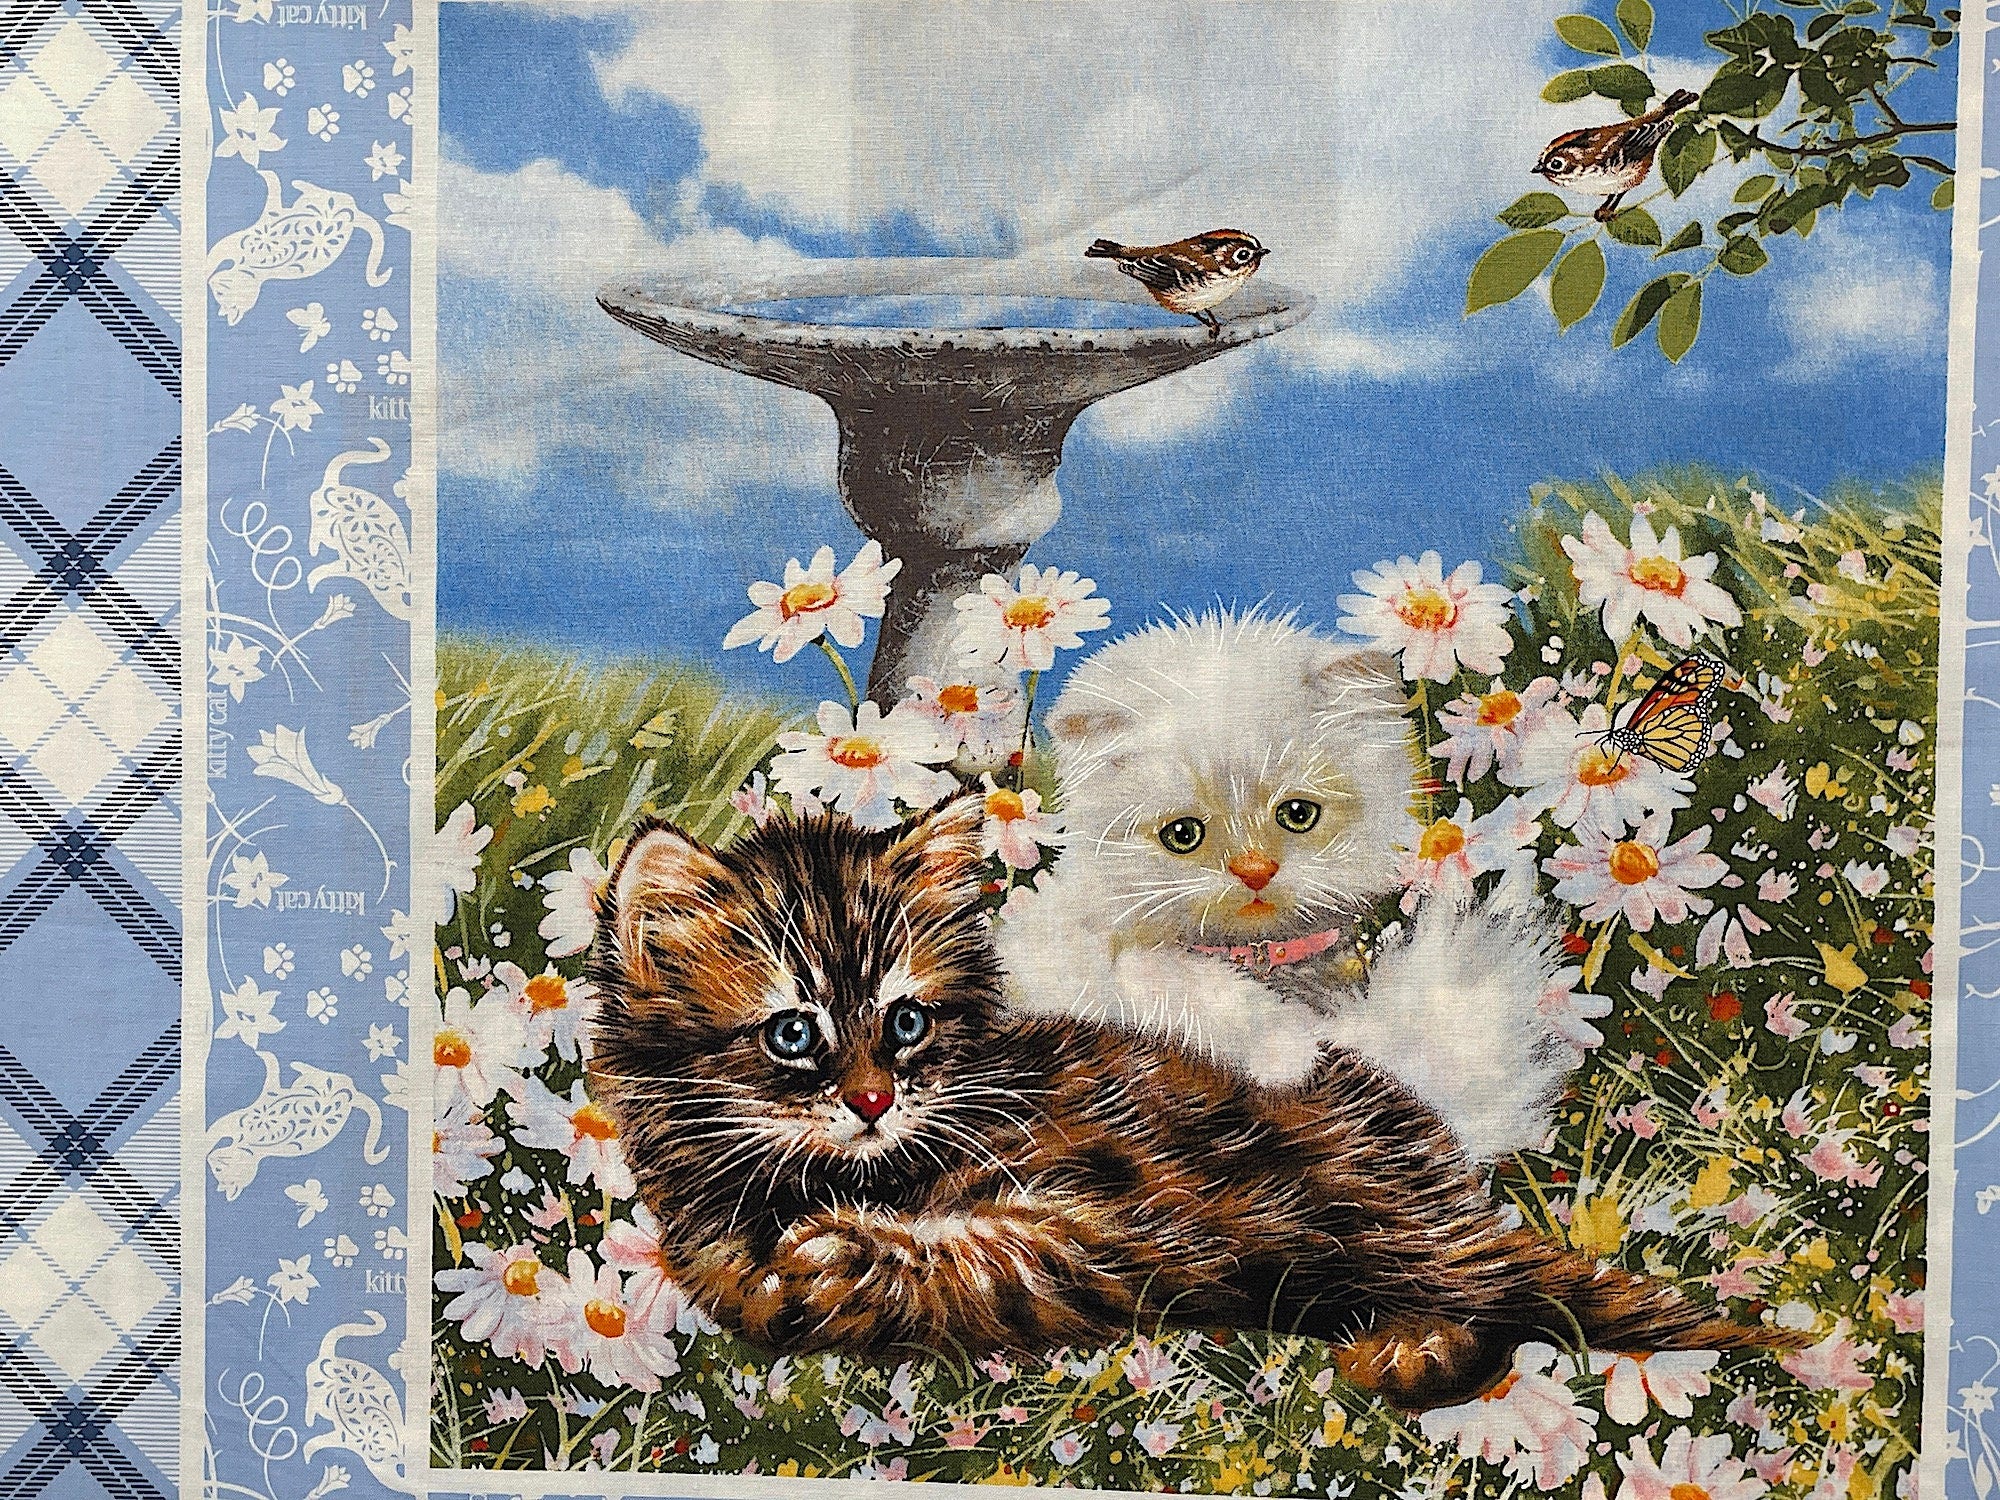 Two cats laying in the grass with a birdbath behind them.